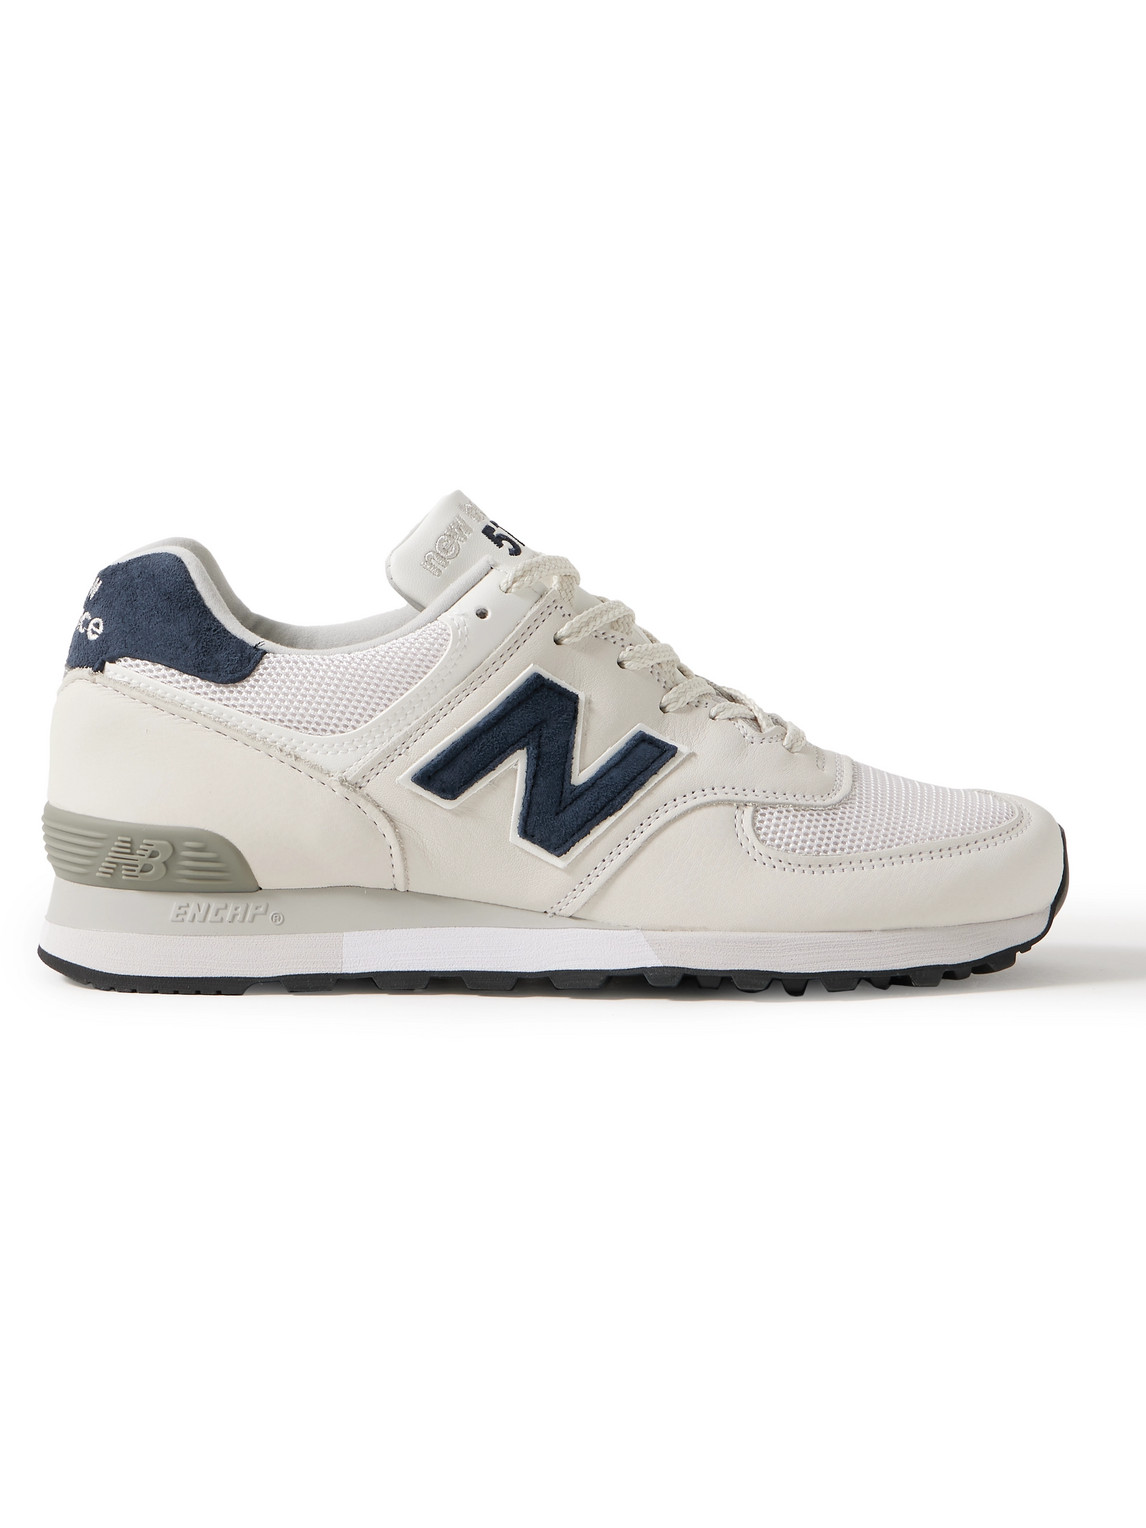 NEW BALANCE 576 SUEDE-TRIMMED LEATHER AND MESH SNEAKERS